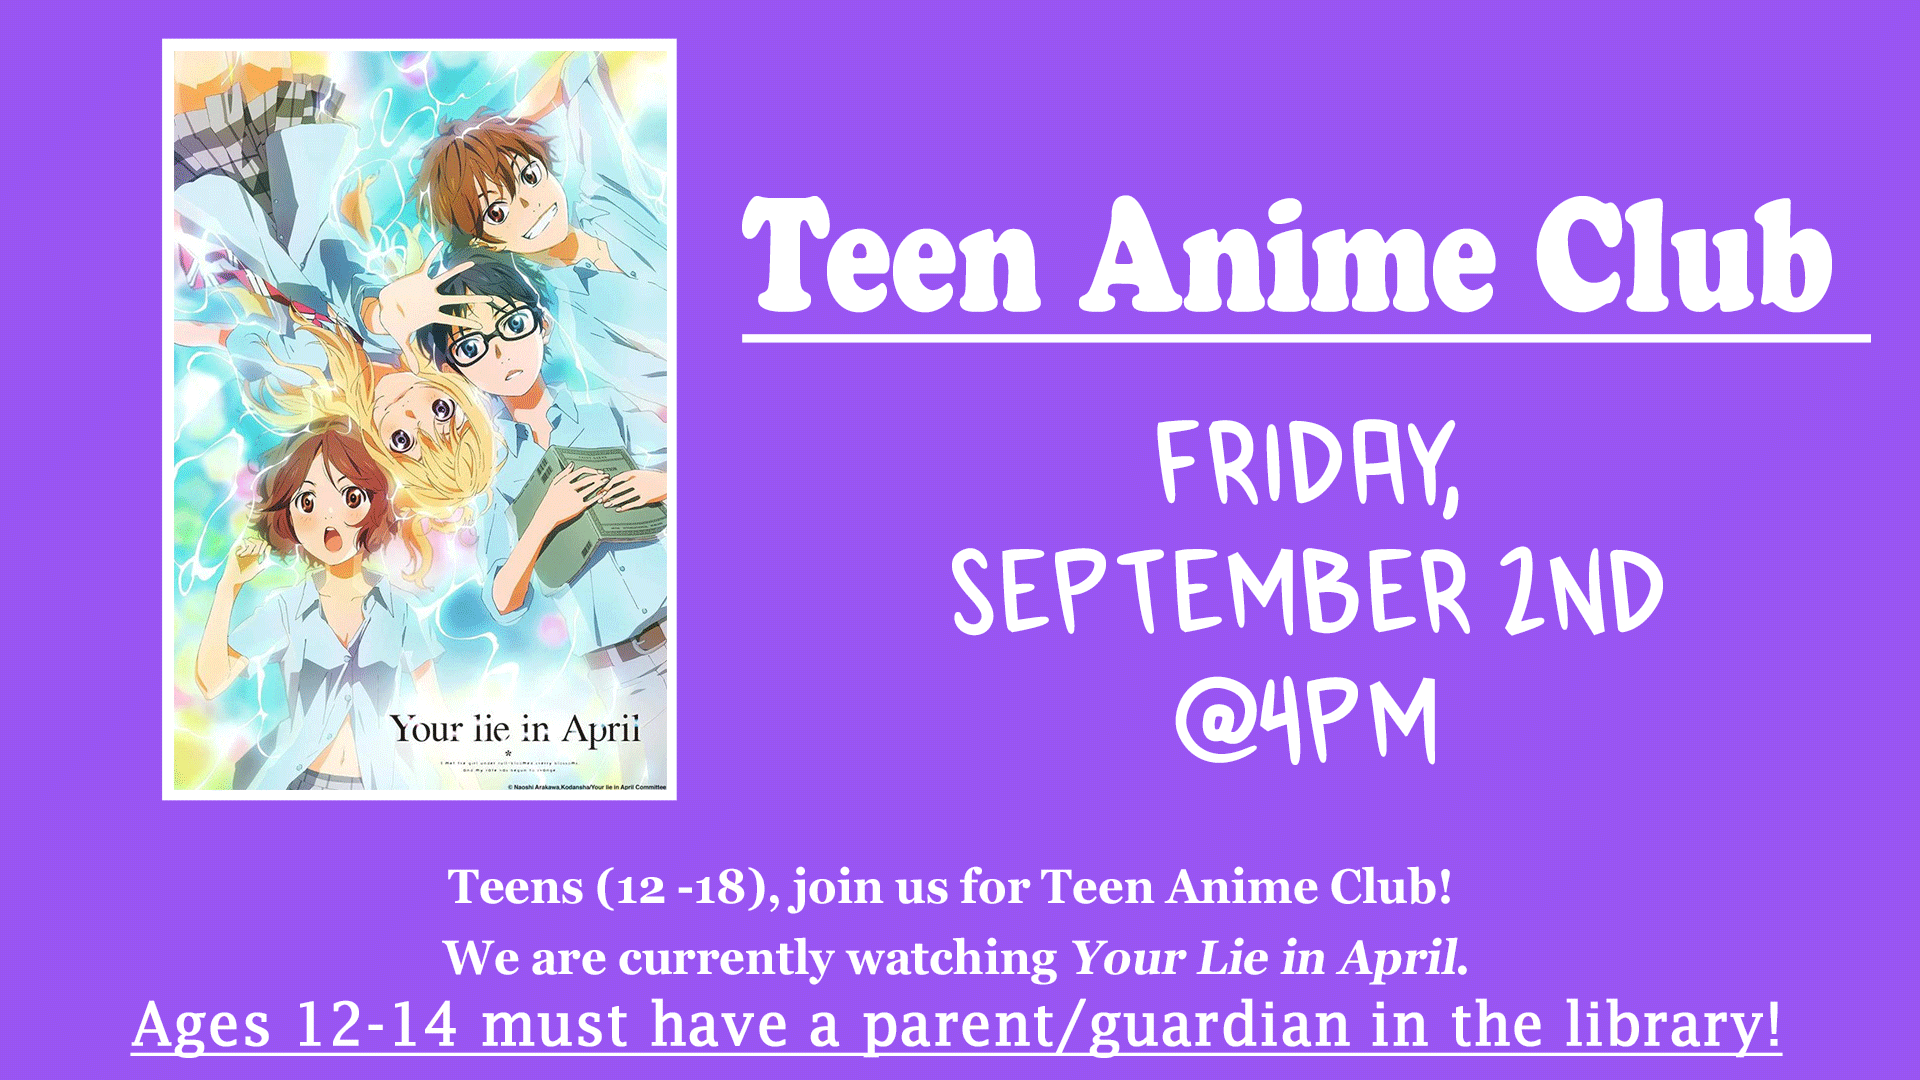 Teen Anime Club is September 2nd at 4:00pm!